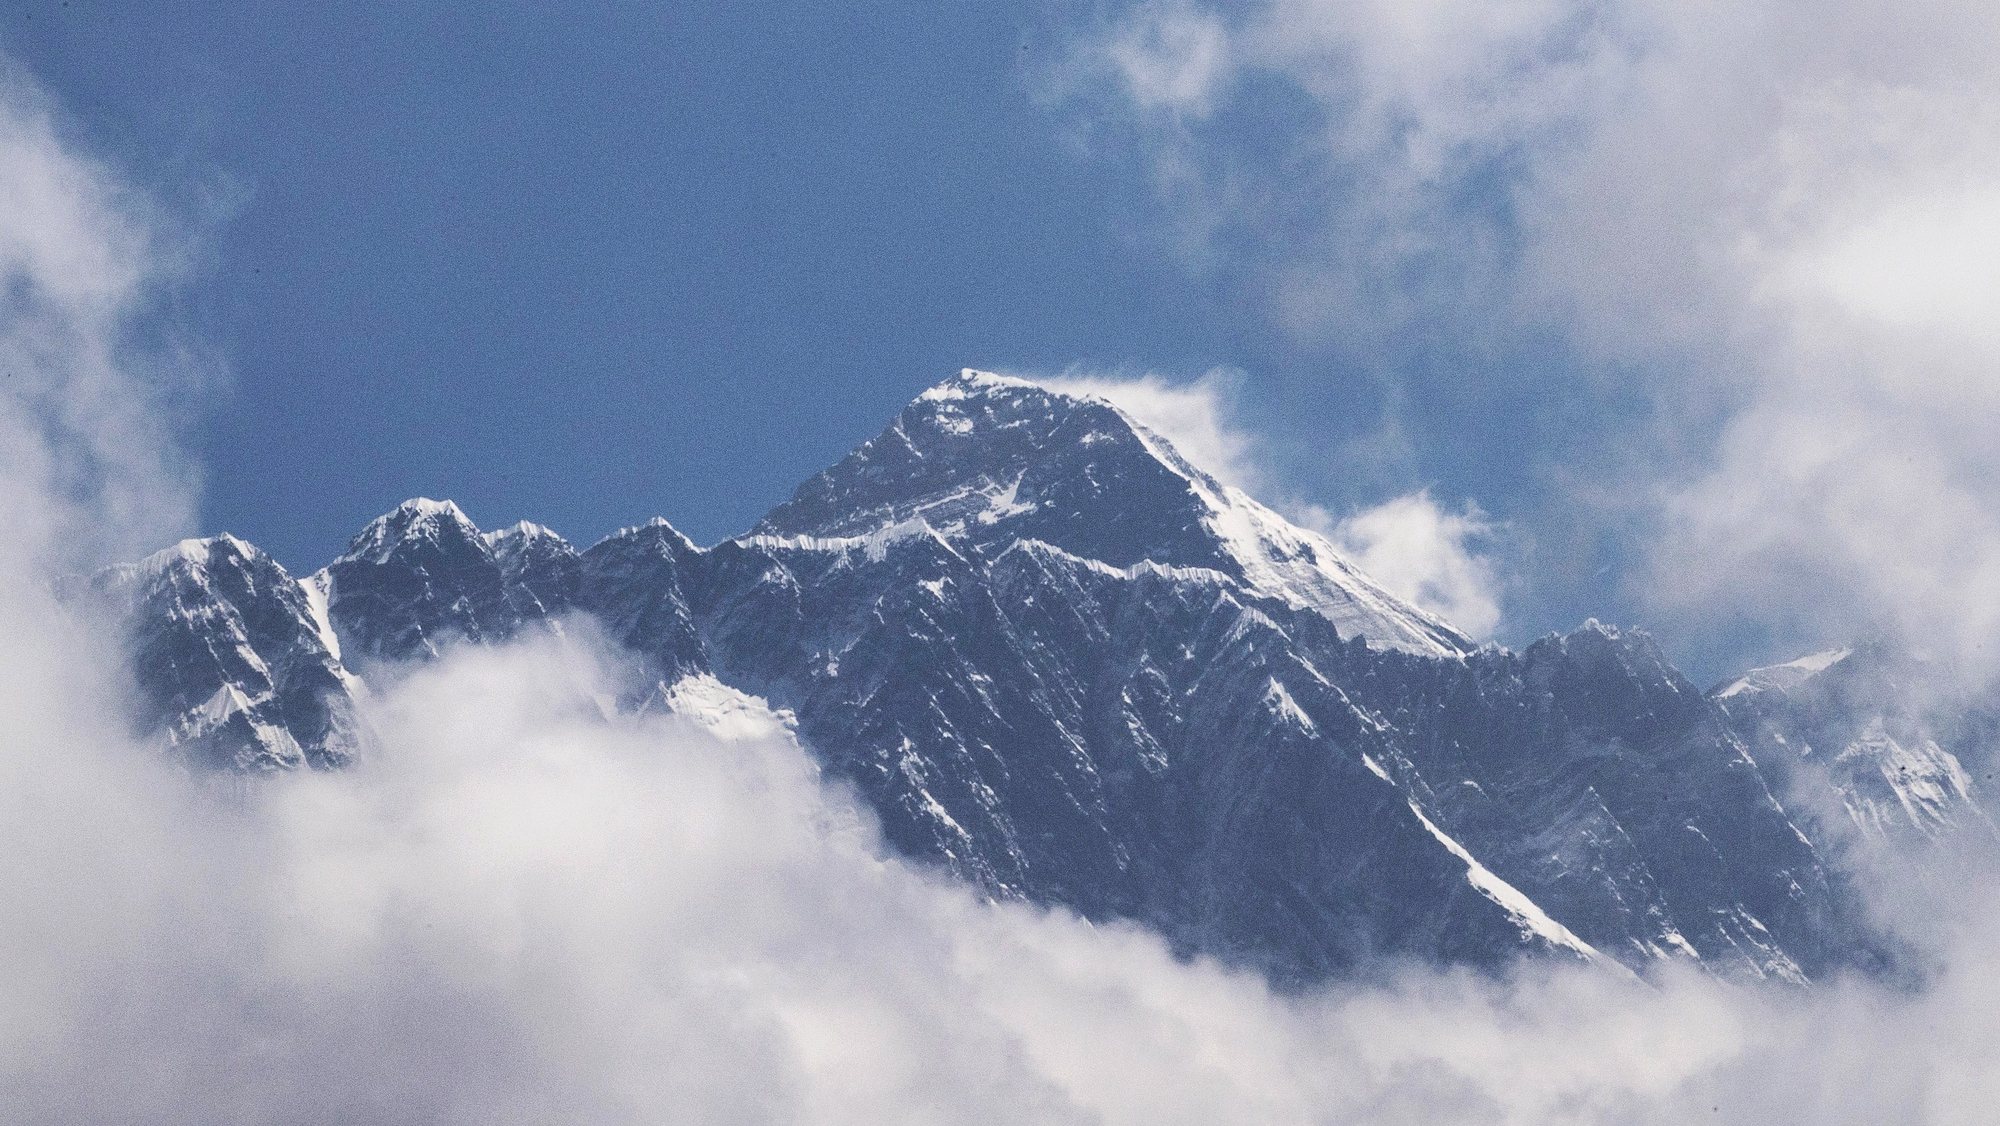 epa08869819 (FILE) - World&#039;s tallest peak, Mount Everest, as seen from Namche Bazar, Solukhumbu district, Nepal 27 May 2019 (reissued 08 December 2020). Nepal and China have agreed on a new official height for Mount Everest. The height of the world&#039;s highest peak is now given as 8848.86 meters. In the past two years, China and Nepal have sent teams to take measurements at the summit in the border area.  EPA/NARENDRA SHRESTHA *** Local Caption *** 55949778